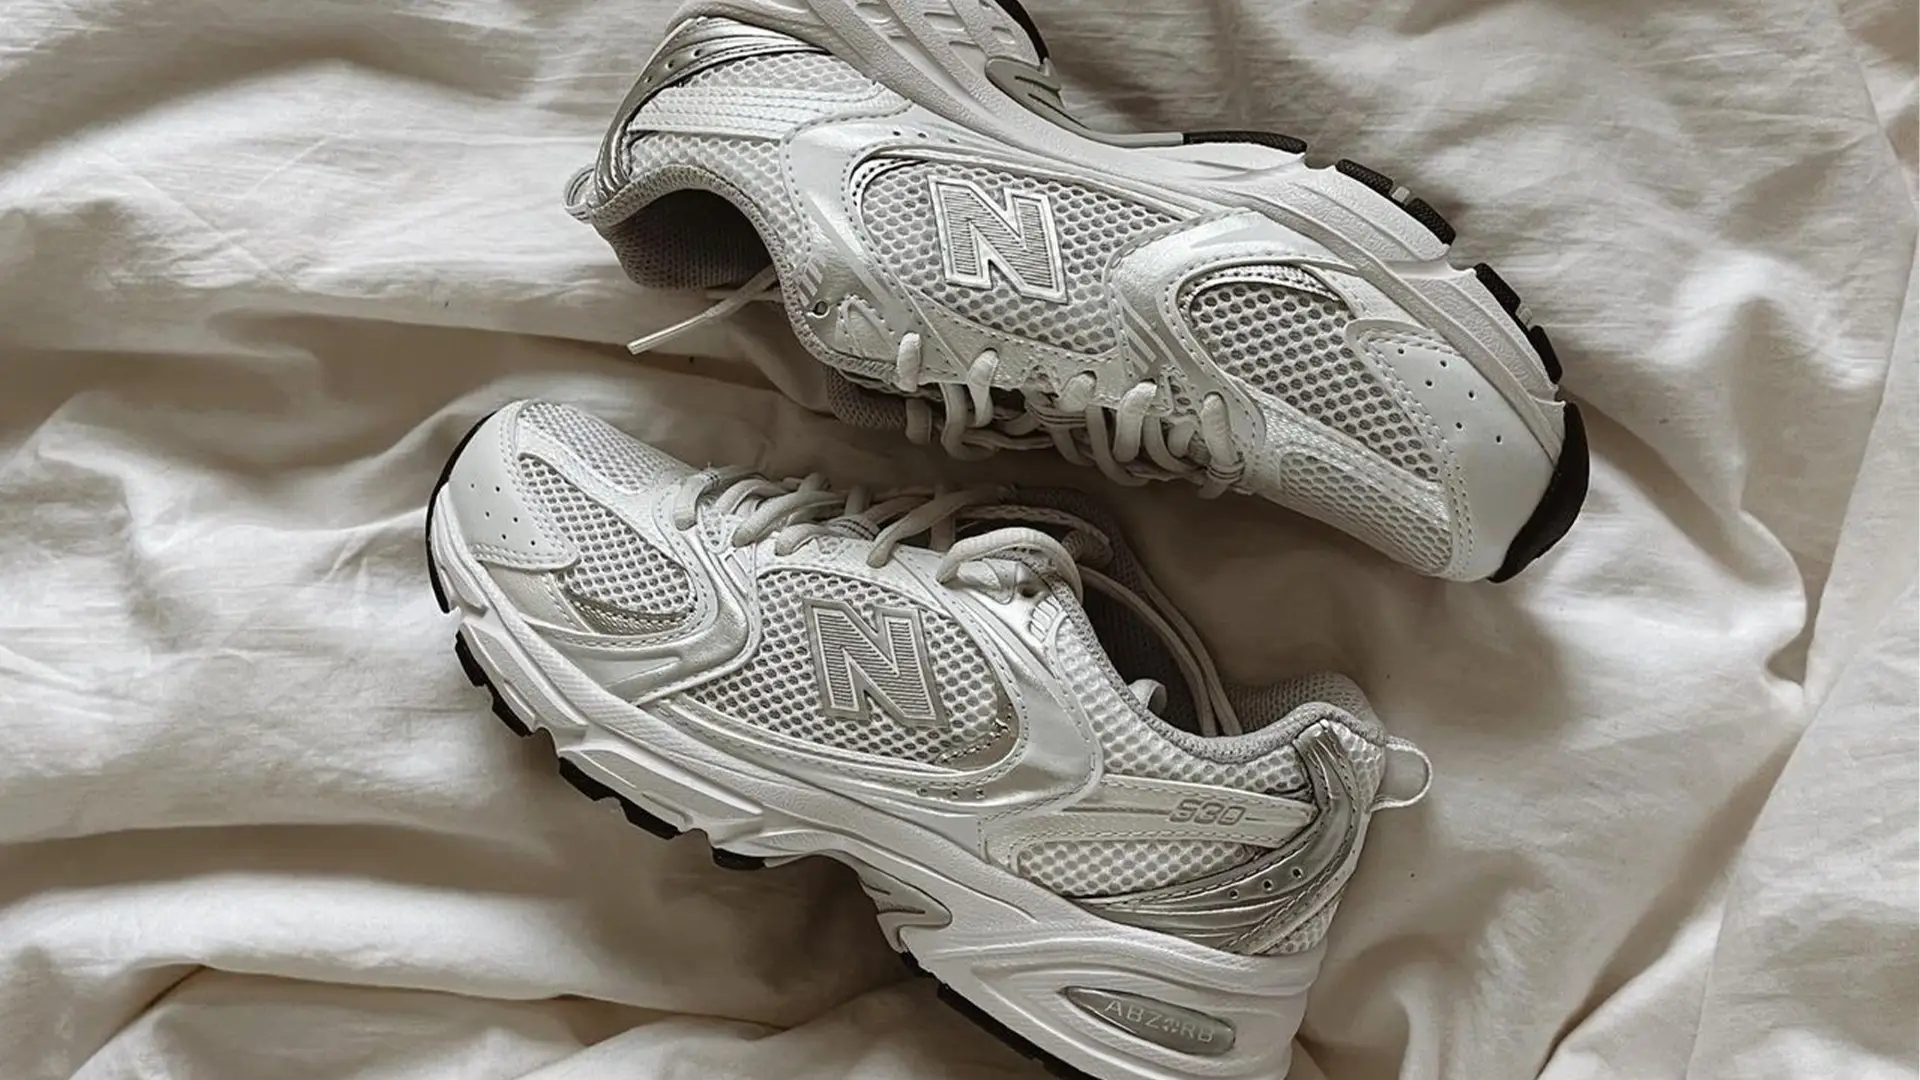 A pair of white New Balance sneakers on a white sheet. - New Balance